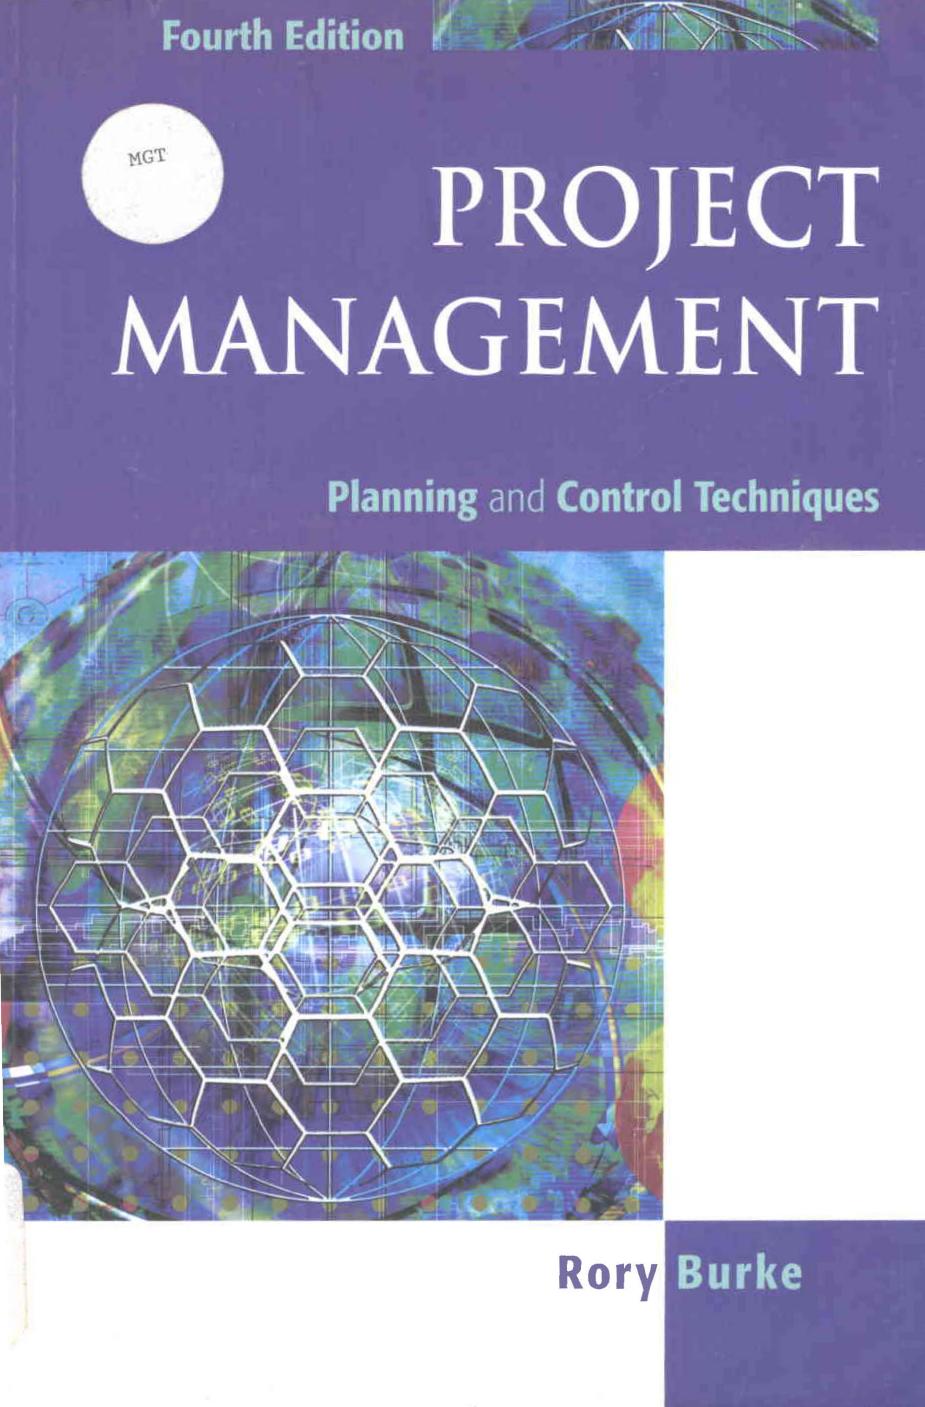 Project Management planning and control techniques 2003